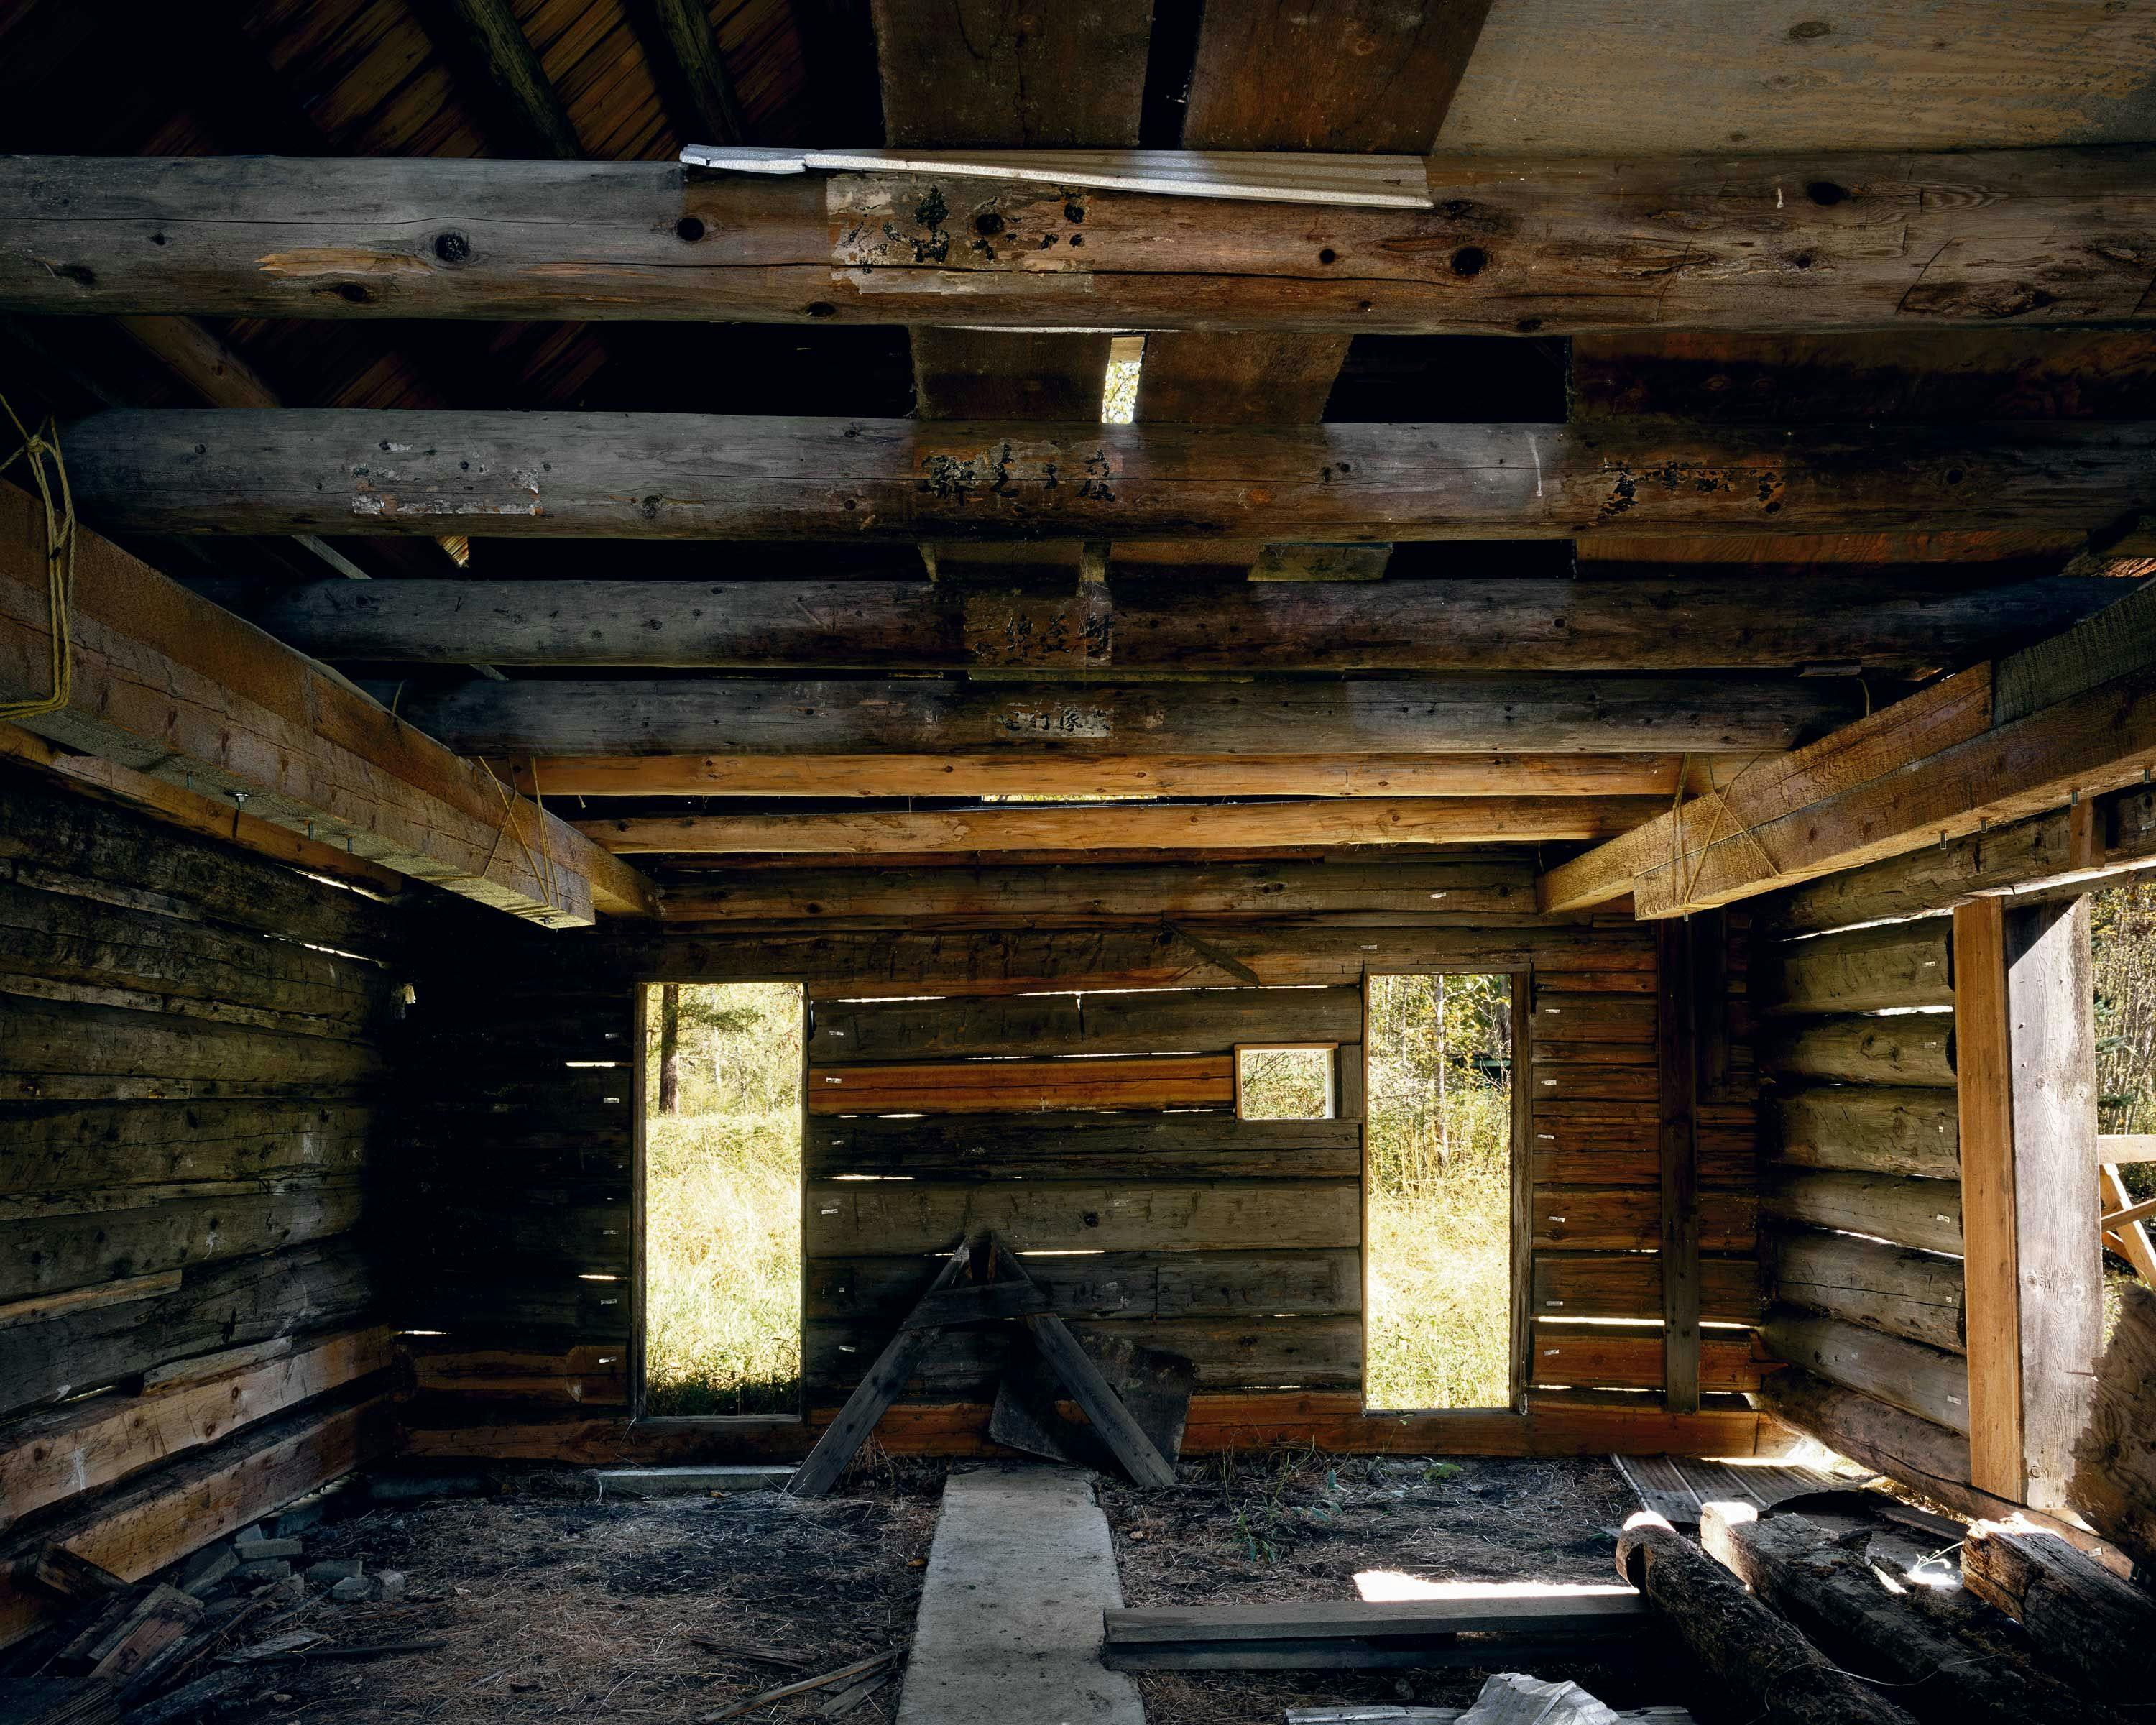 A photograph by Stan Douglas, titled Tong Building, Quesnel Forks, dated 2006.